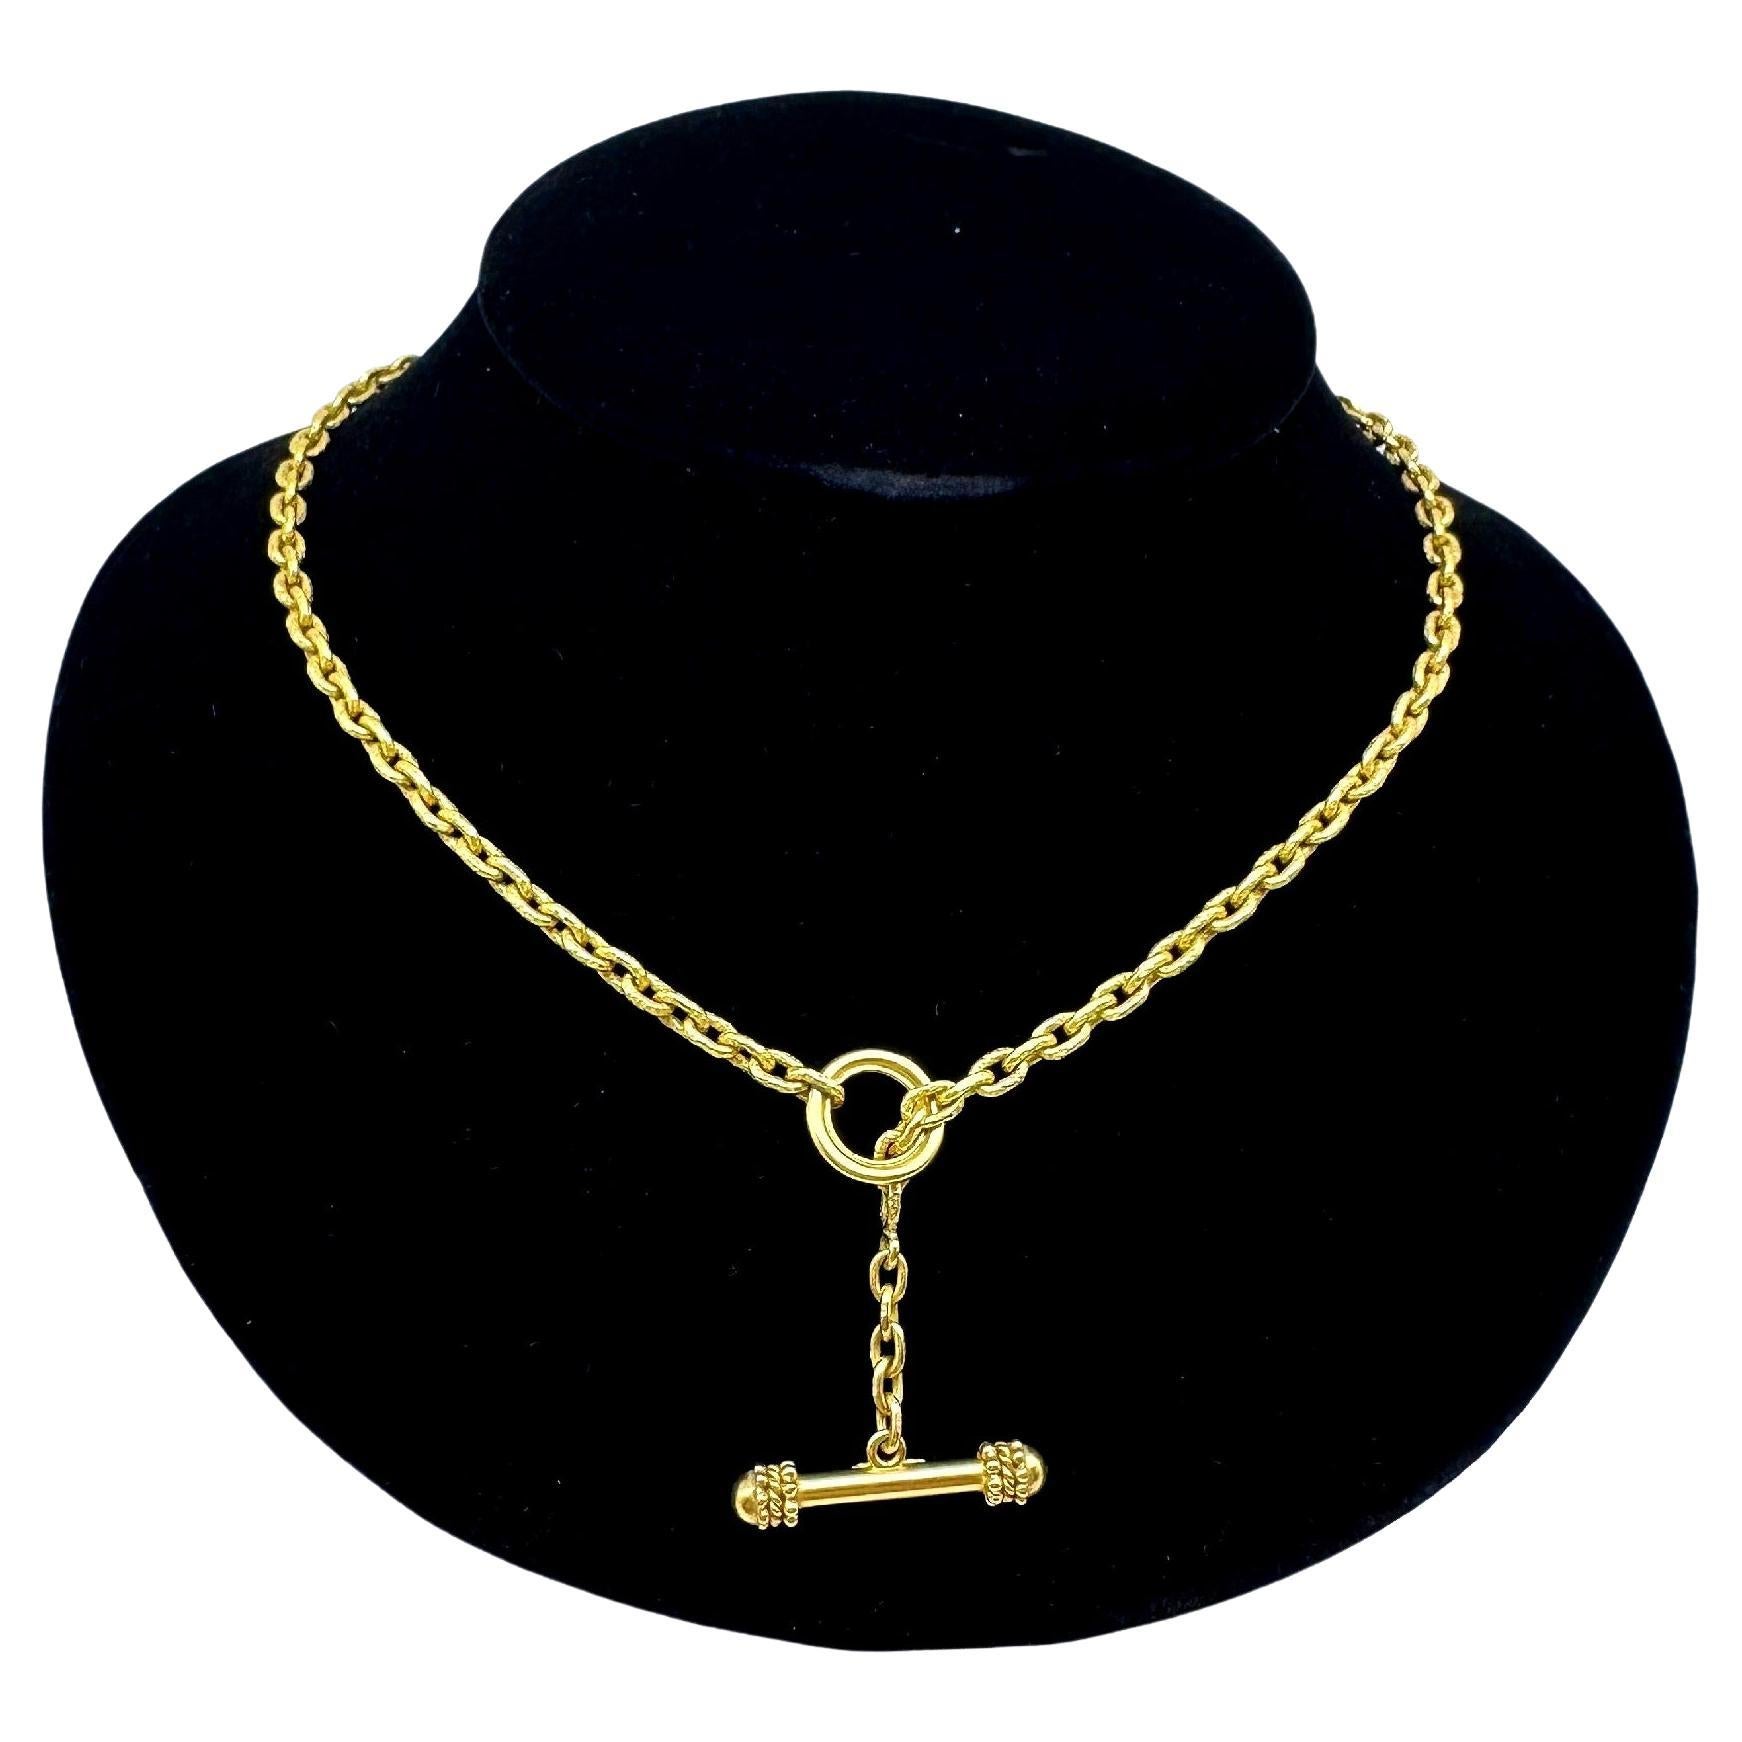 vca hammered gold necklace